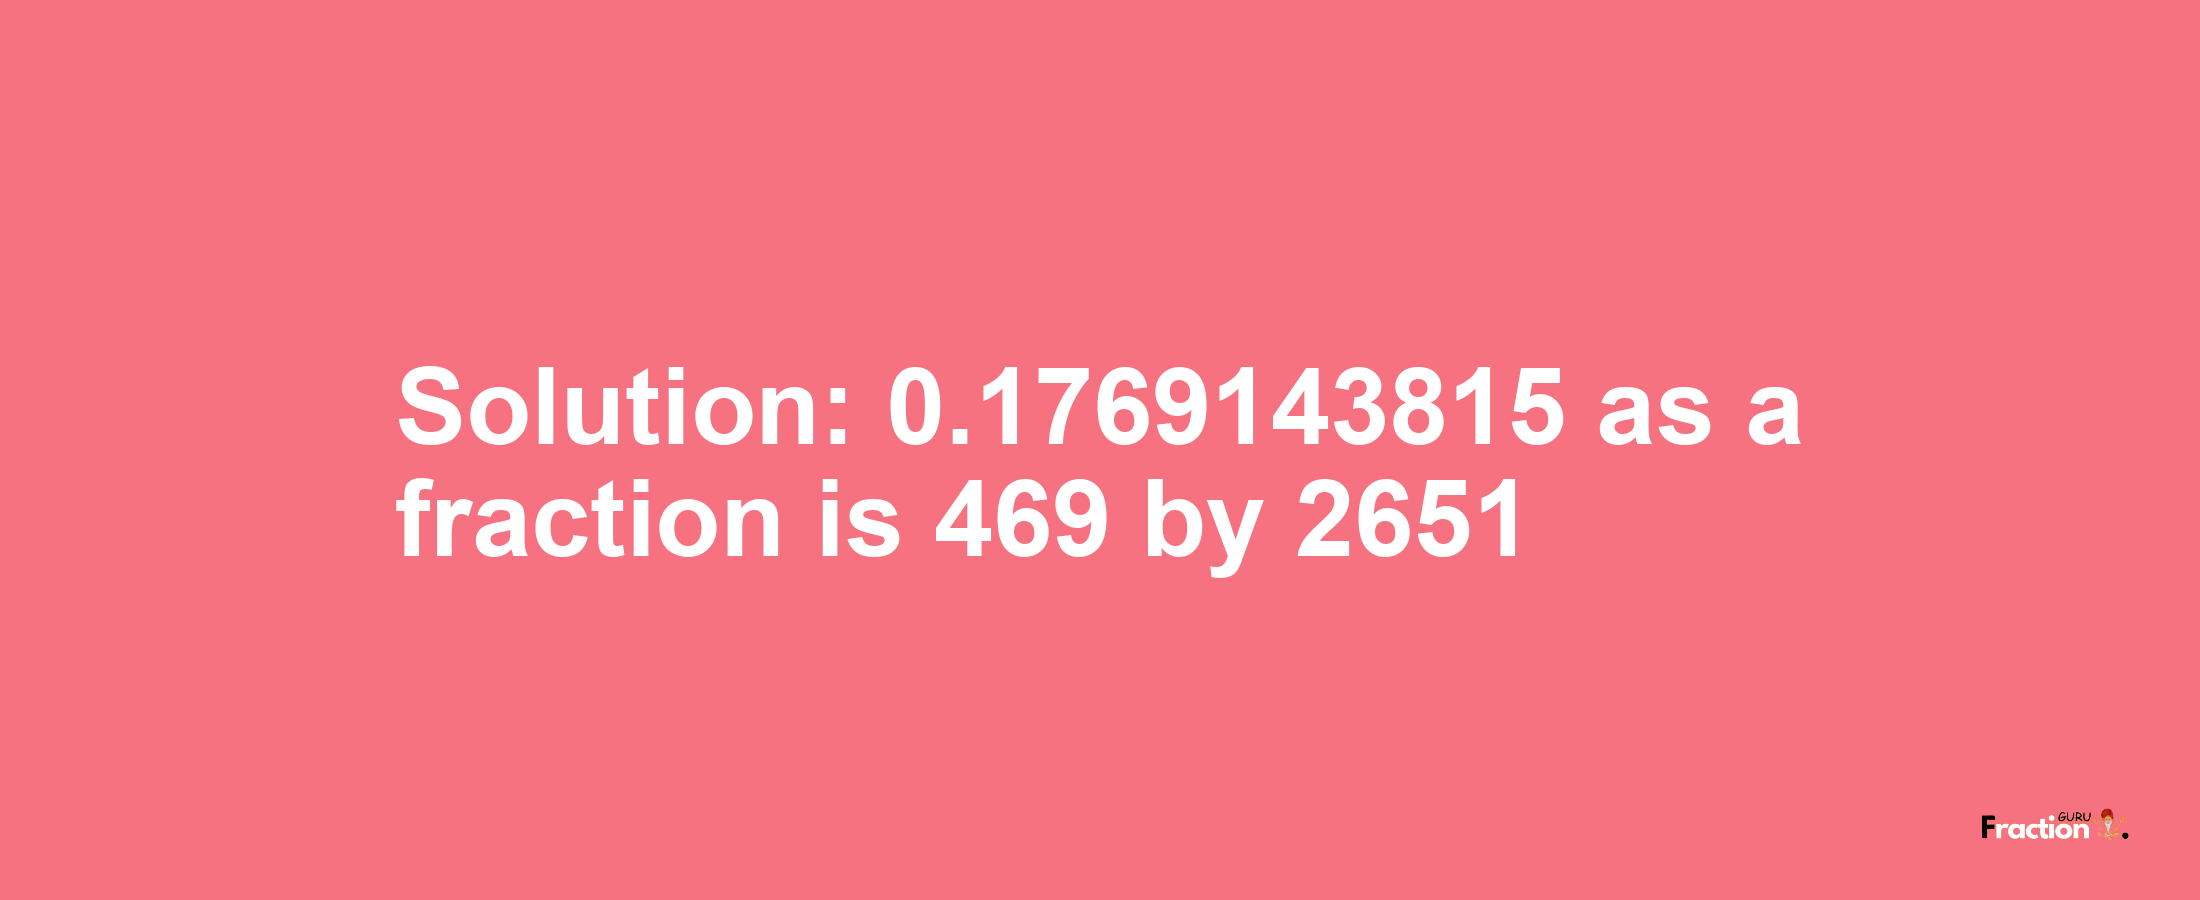 Solution:0.1769143815 as a fraction is 469/2651